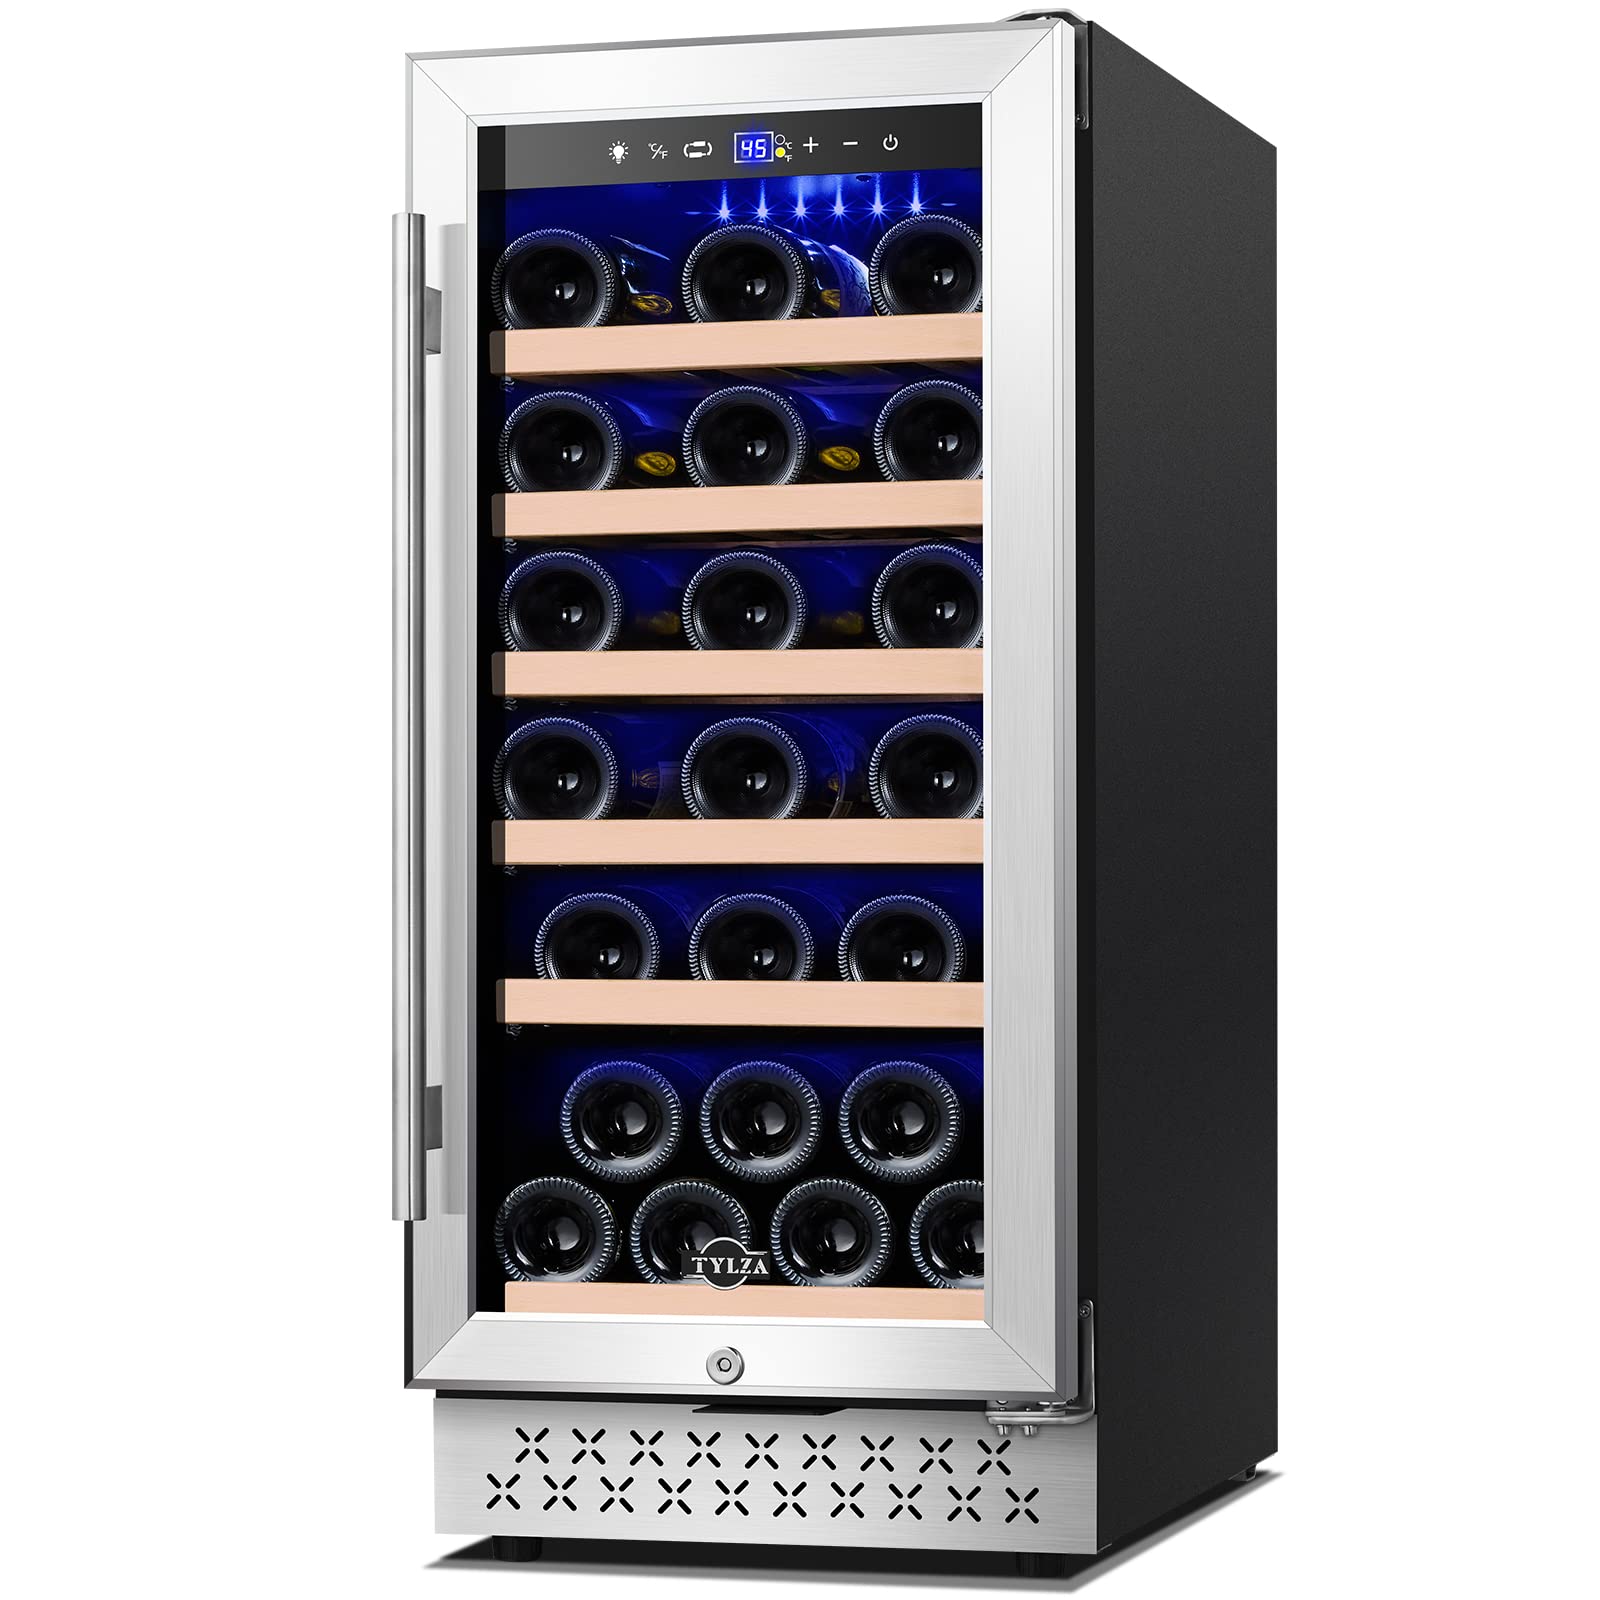 Tylza 15 Inch Wine Cooler Under Counter, 30 Bottle Built-in Wine Fridge with Stainless Steel Tempered Glass Door, Temp Memory Function, Freestanding Fast Cooling Wine refrigerator, Quiet Operation